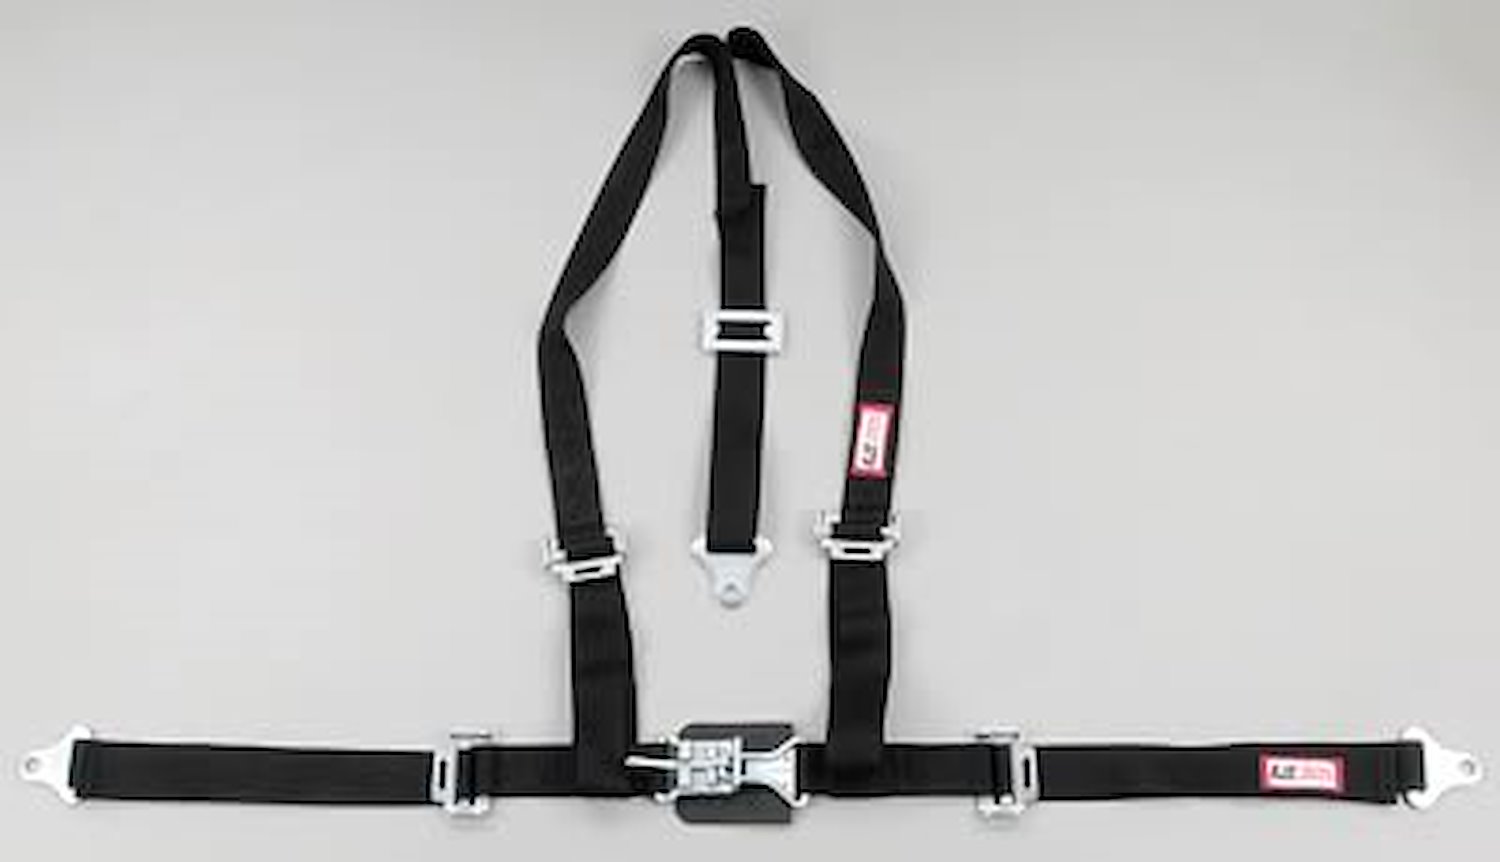 NON-SFI L&L HARNESS 3 PULL UP Lap BELT SEWN IN 2 S.H. Y FLOOR Mount ALL WRAP ENDS YELLOW